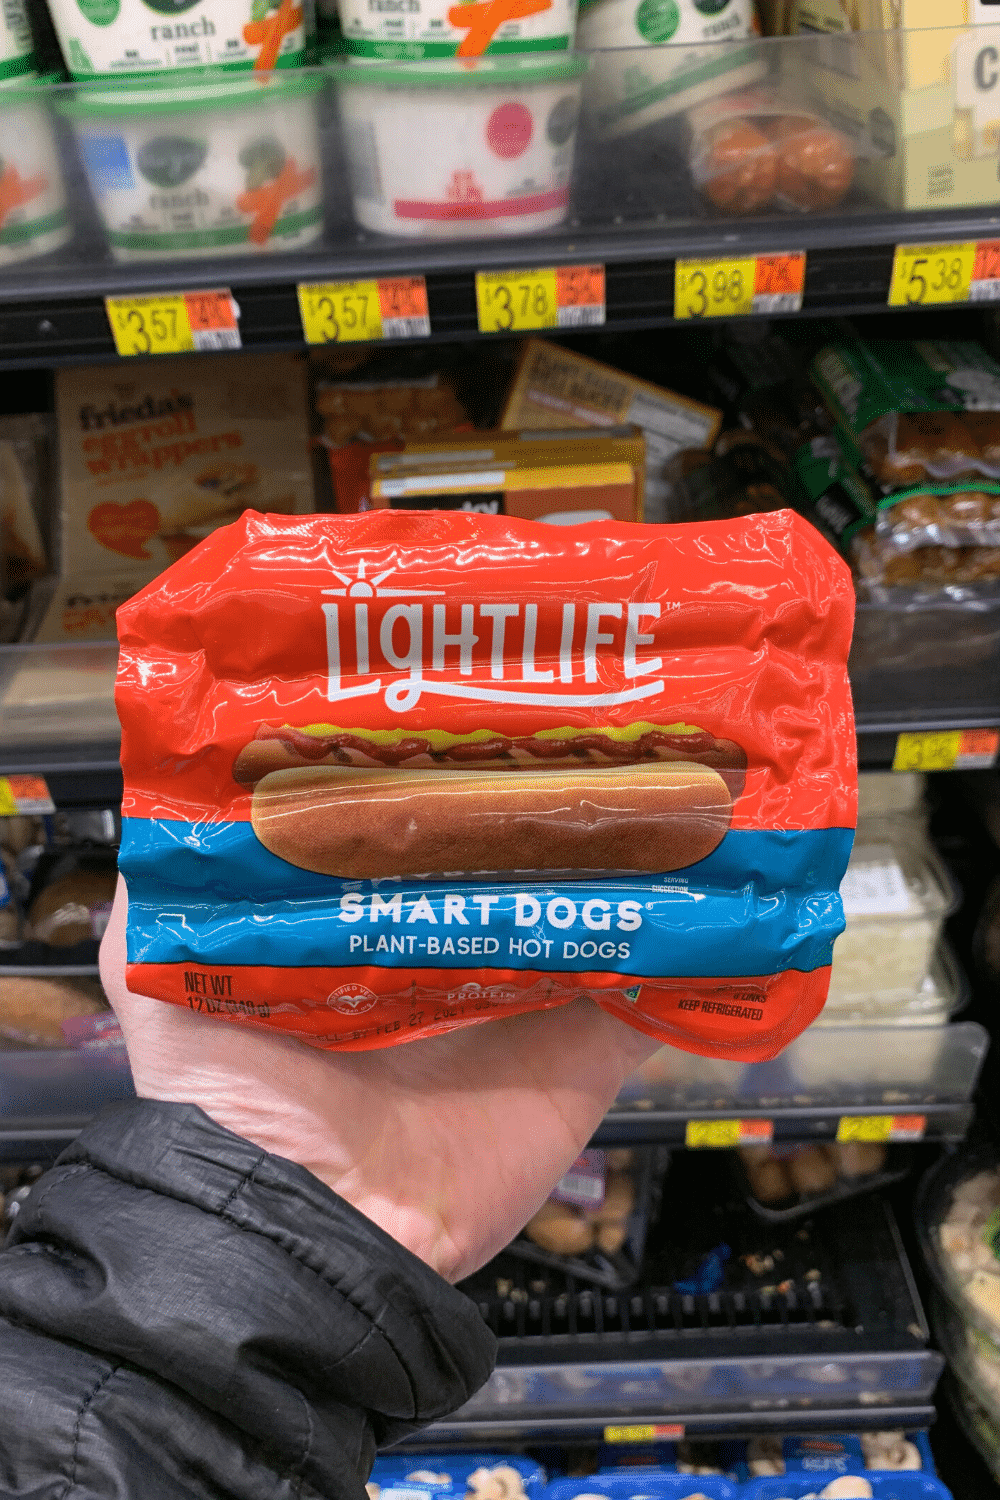 A hand holding light life smart dogs plant-based hotdogs